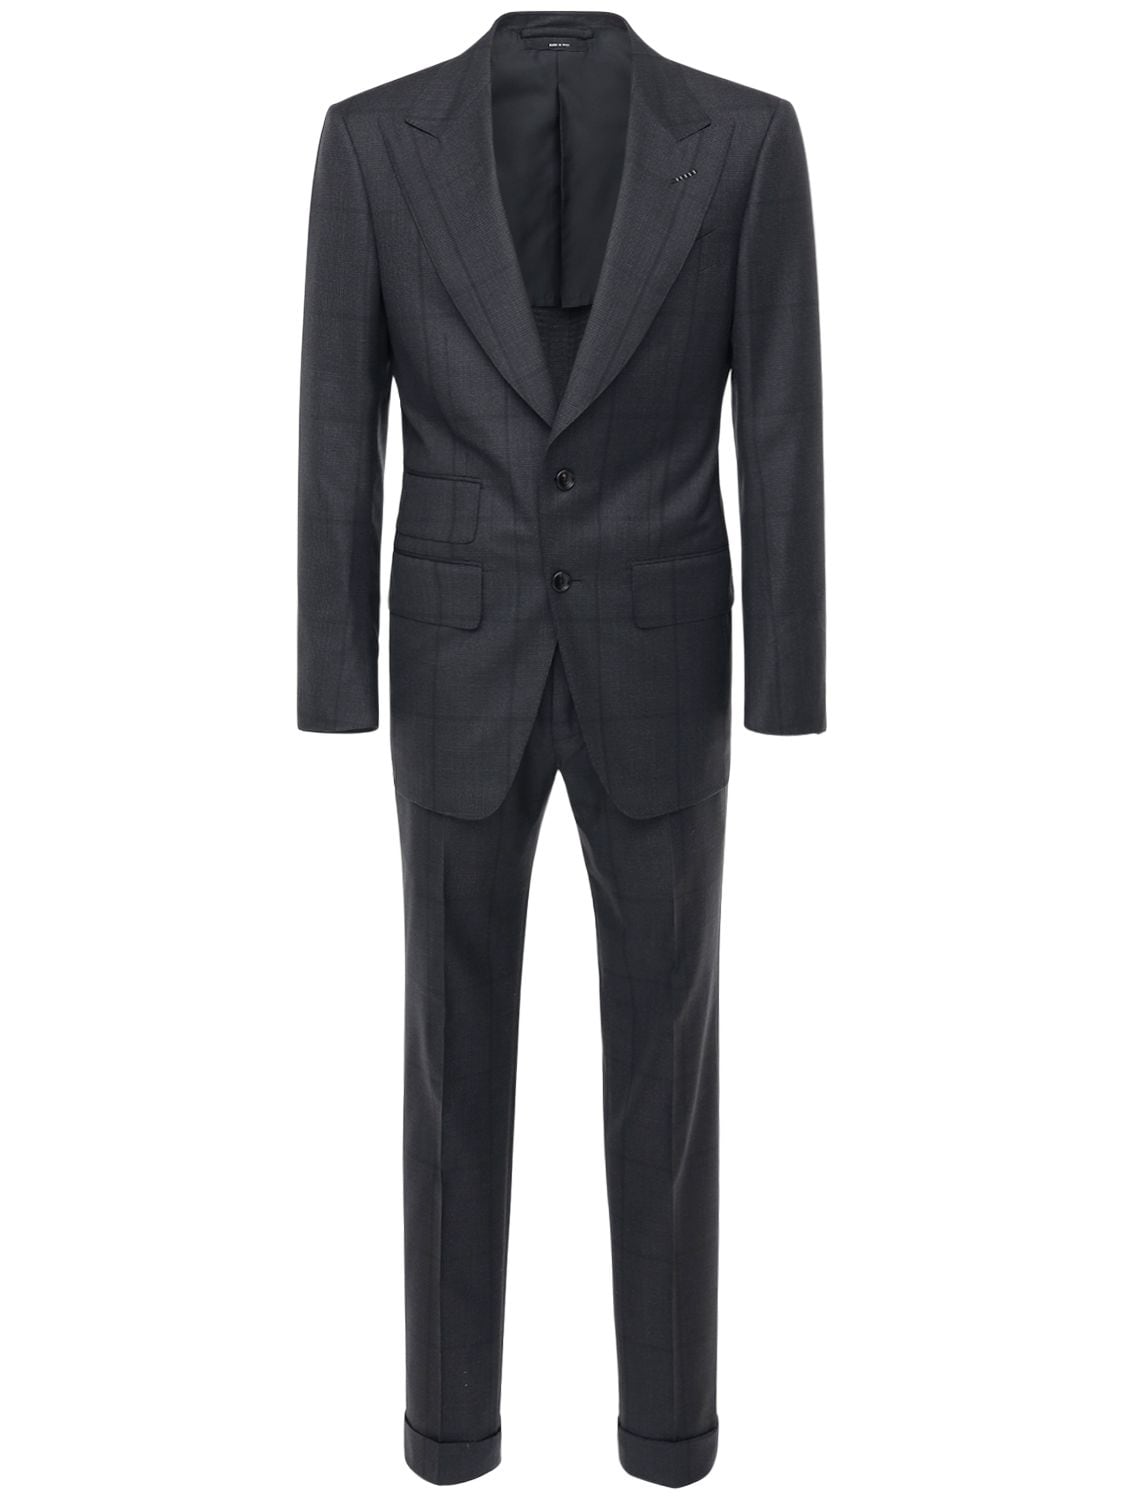 Tom Ford Men's Jb O'connor Prince Of Wales Suit In Dark Grey